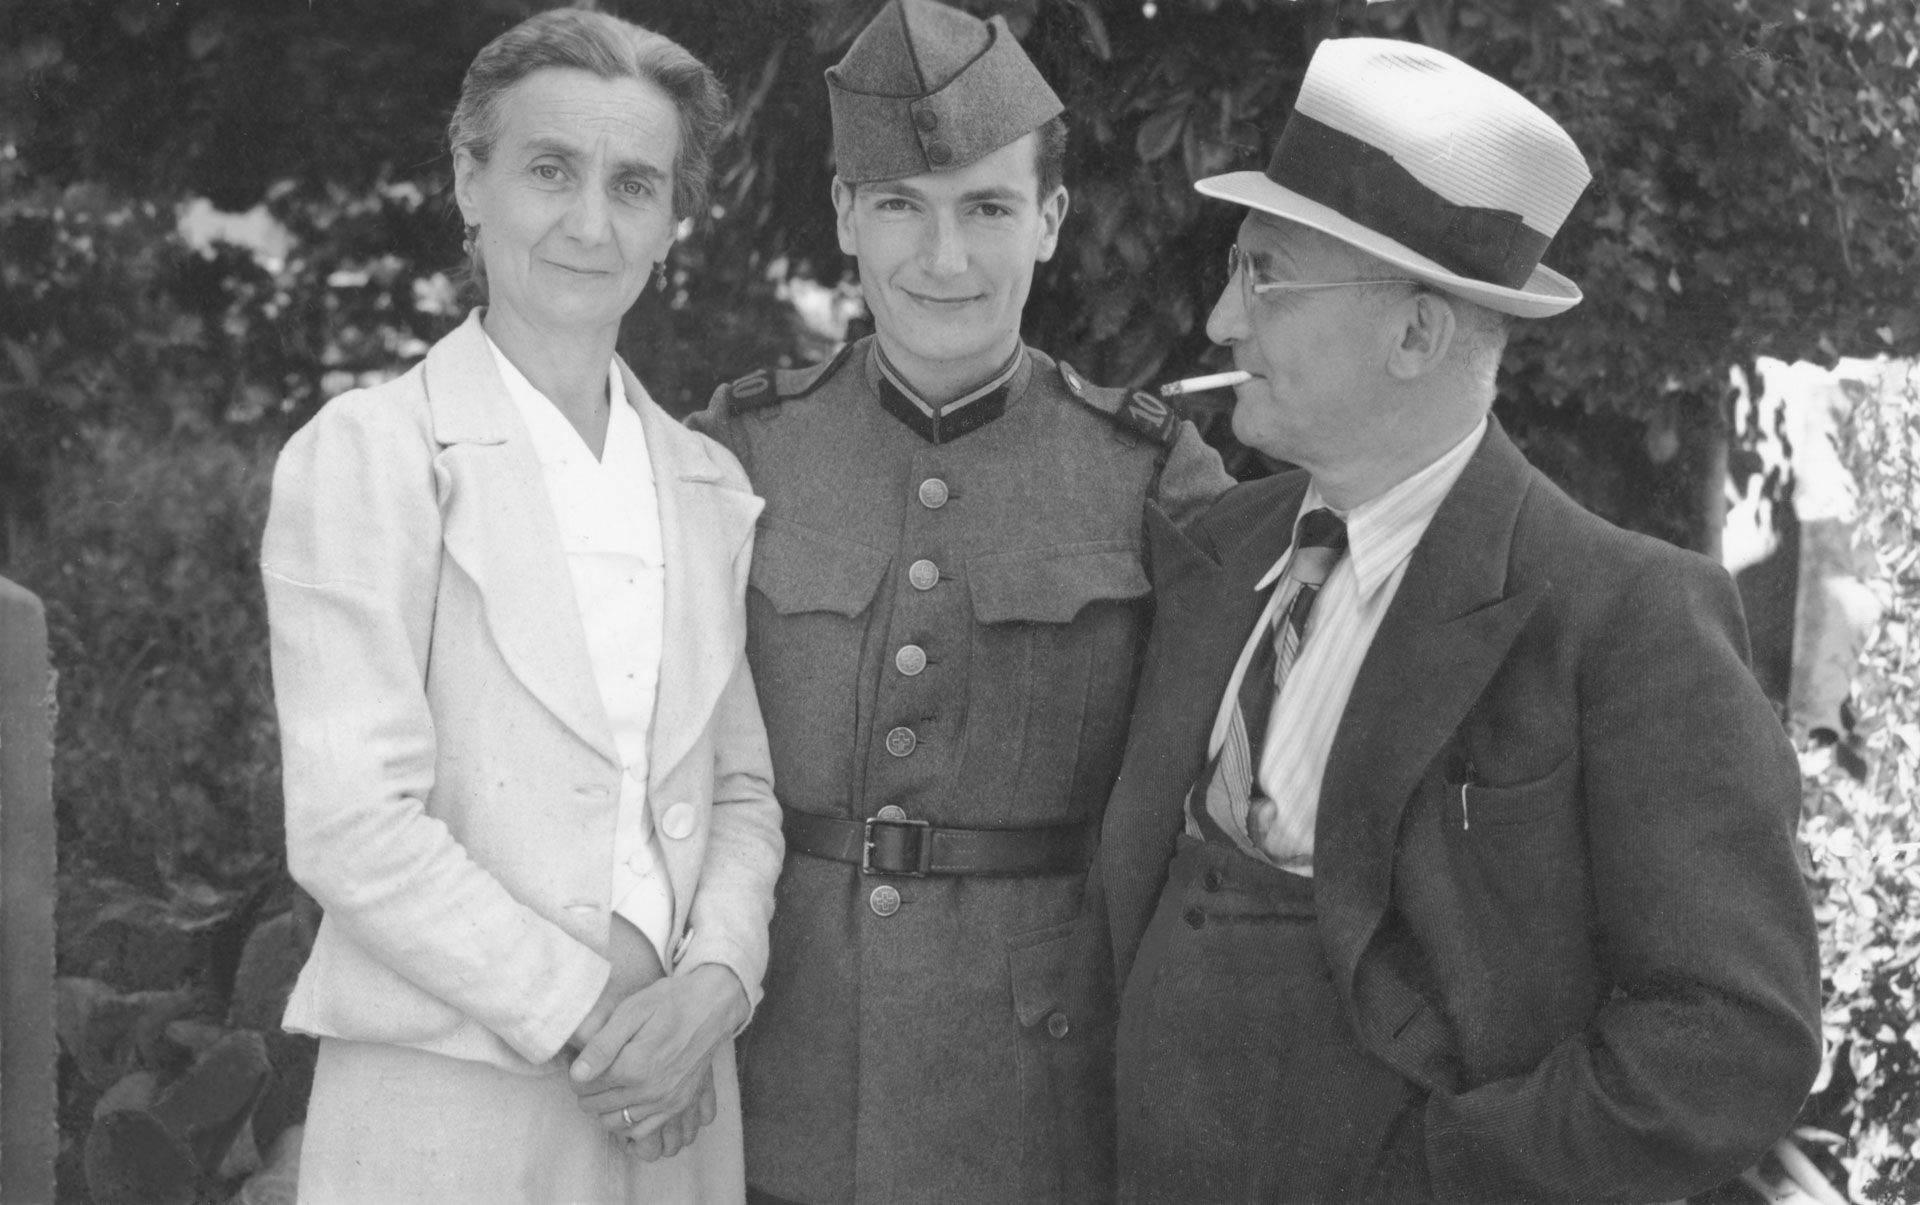 A young man wearing an airforce uniform, standing between his mother and father.